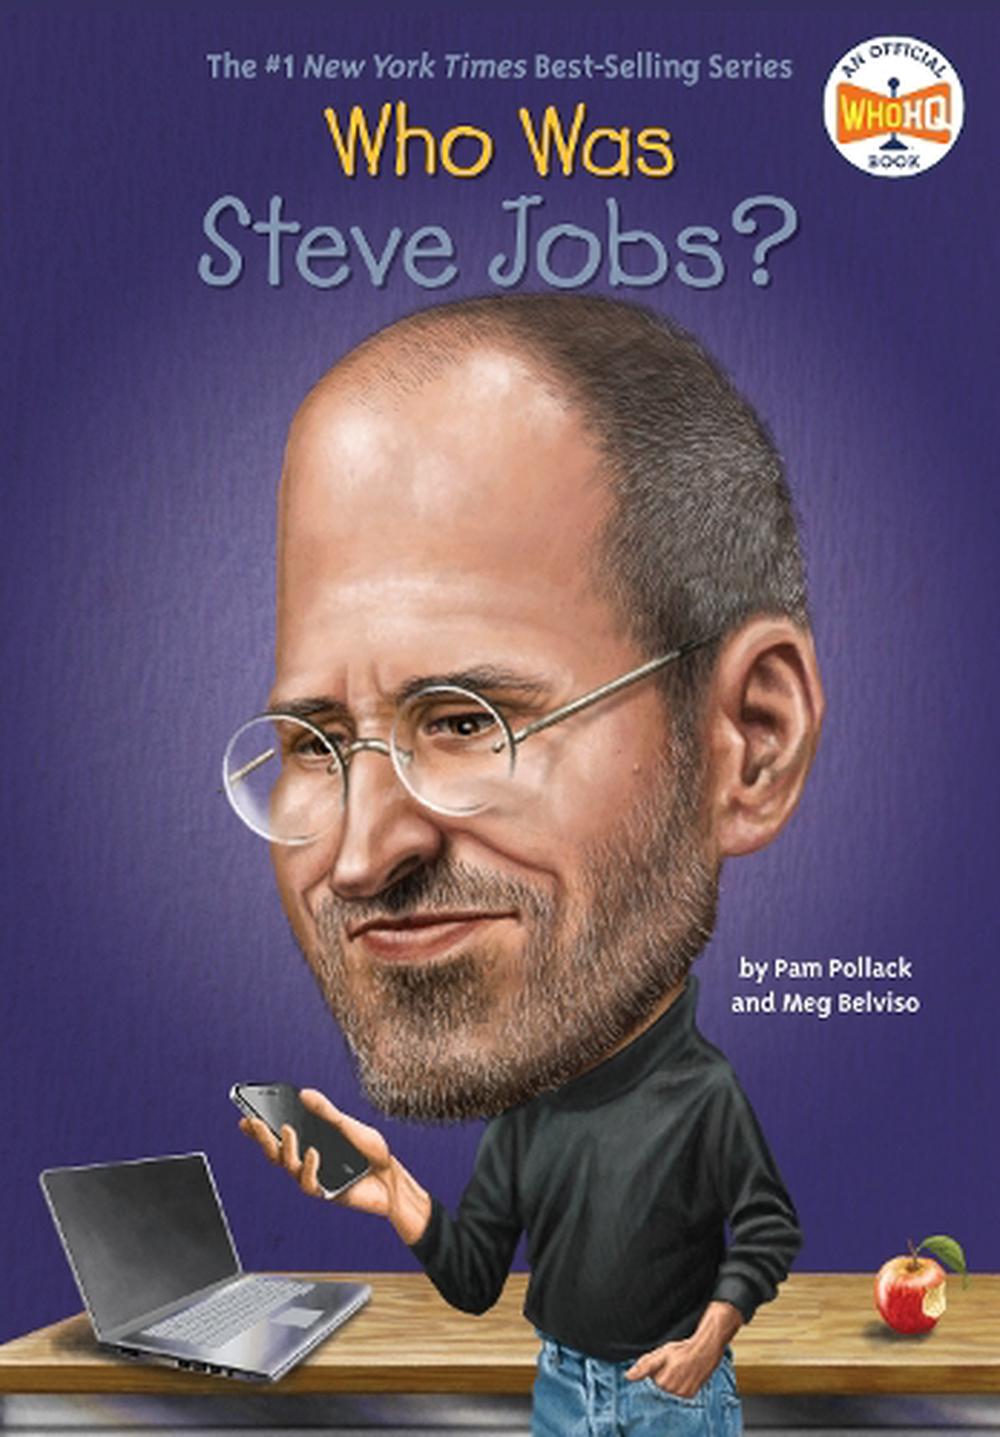 Who Was?: Who Was Steve Jobs? (Paperback) - image 1 of 1